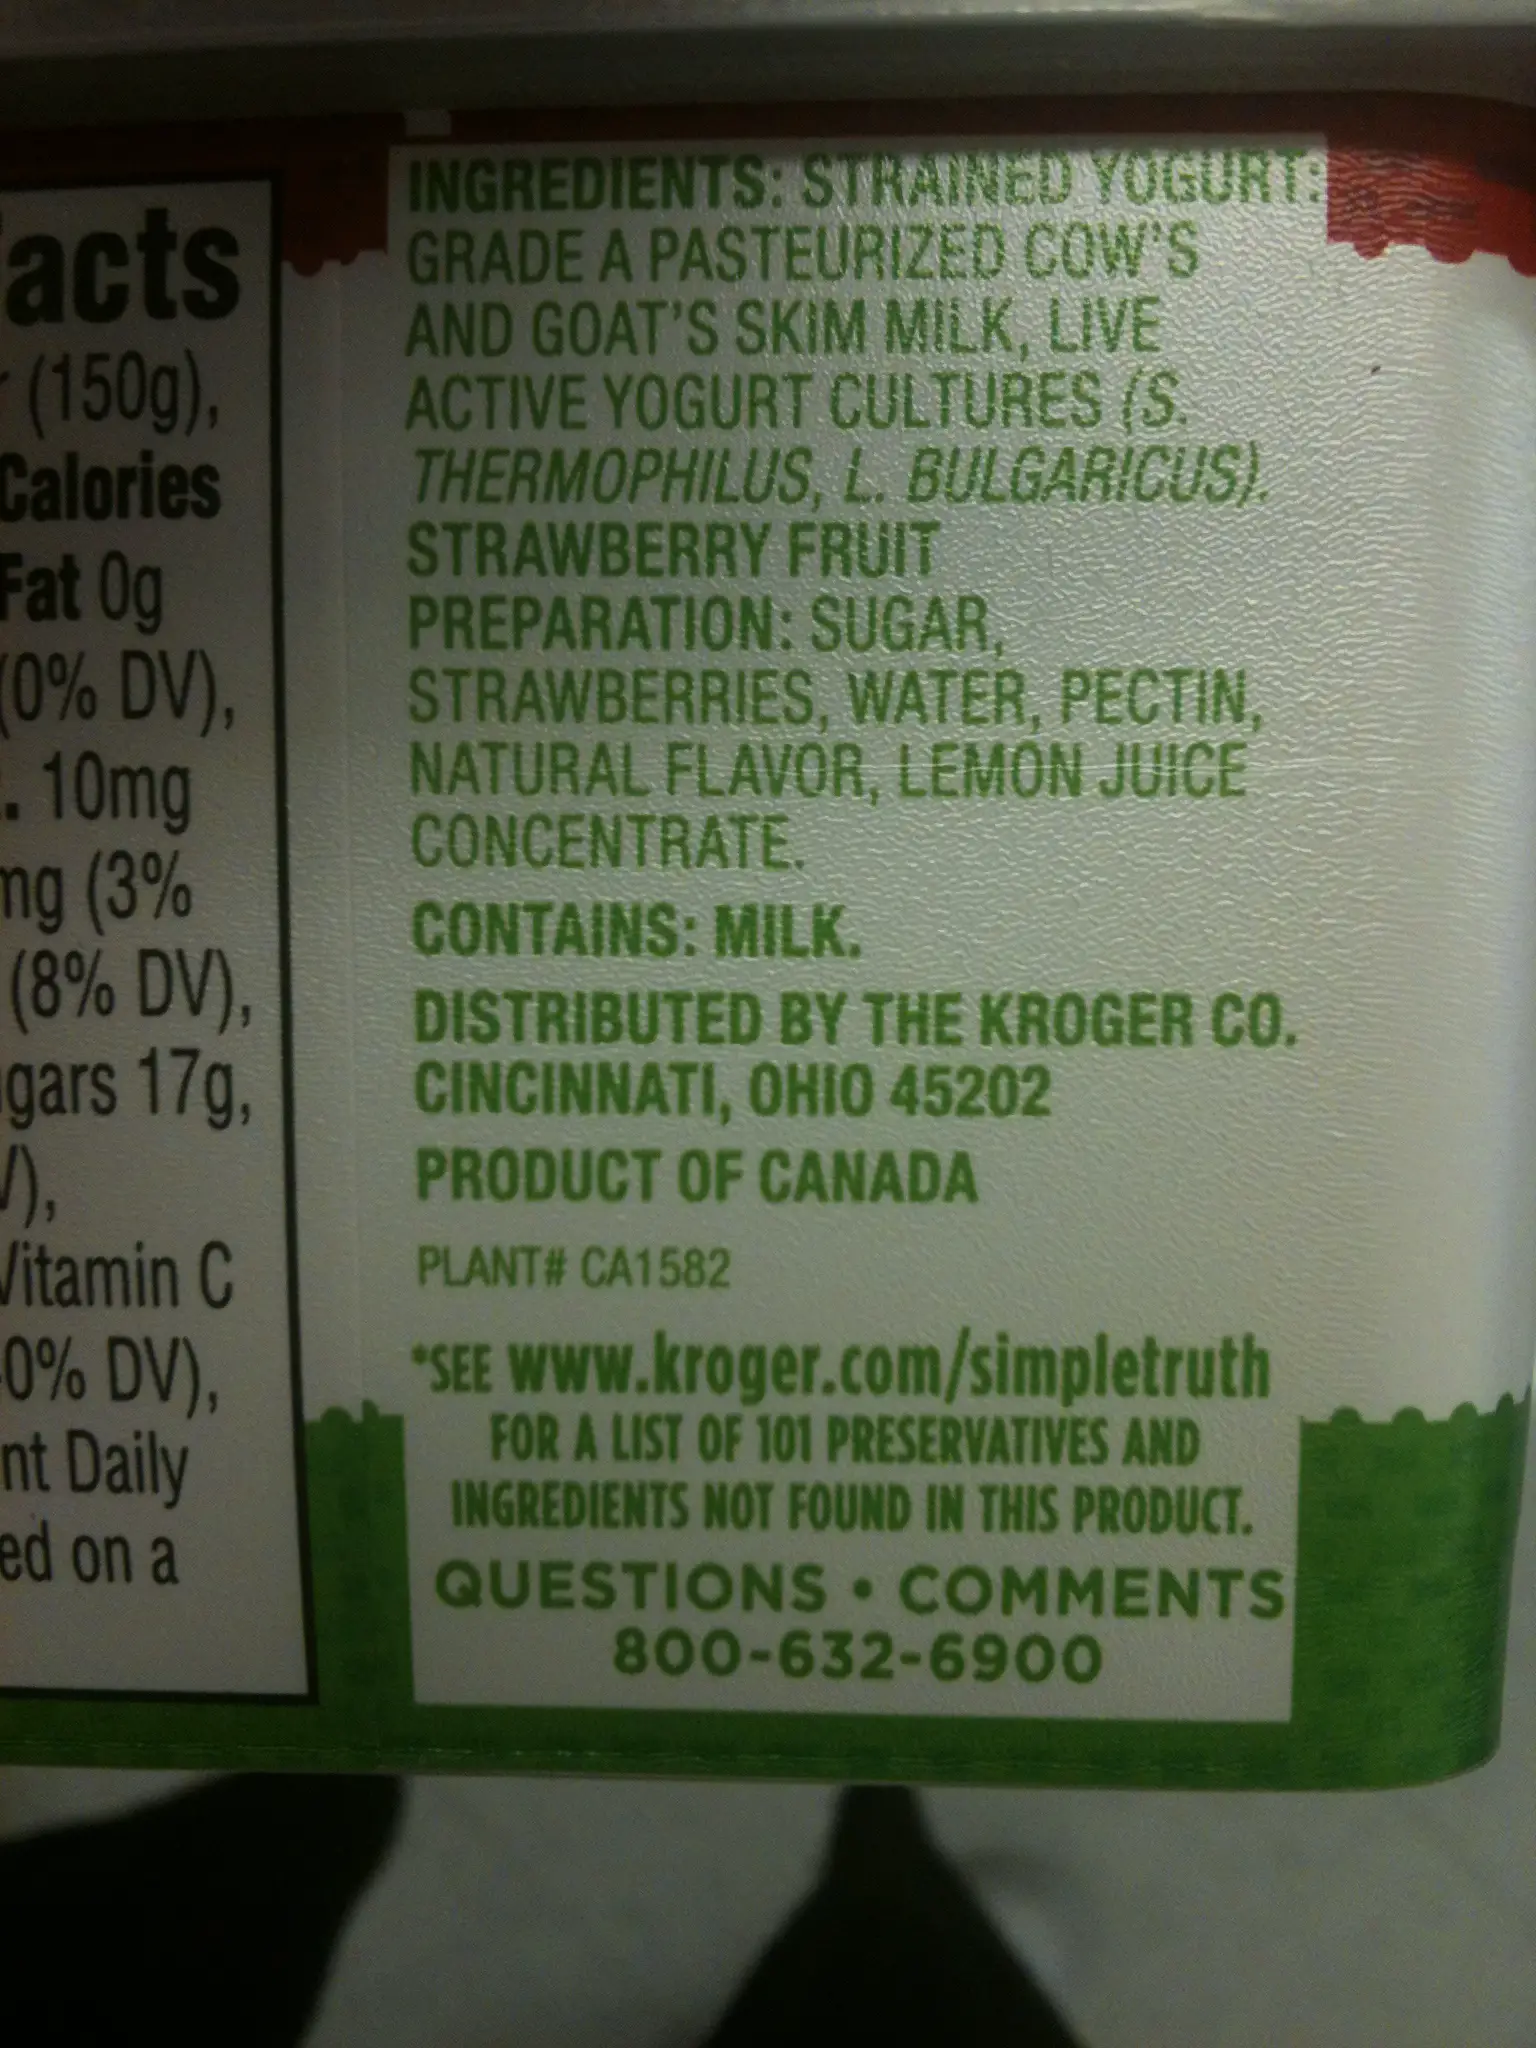 Think again. This product appears to be made from the same type of unlabeled milk as the others. 